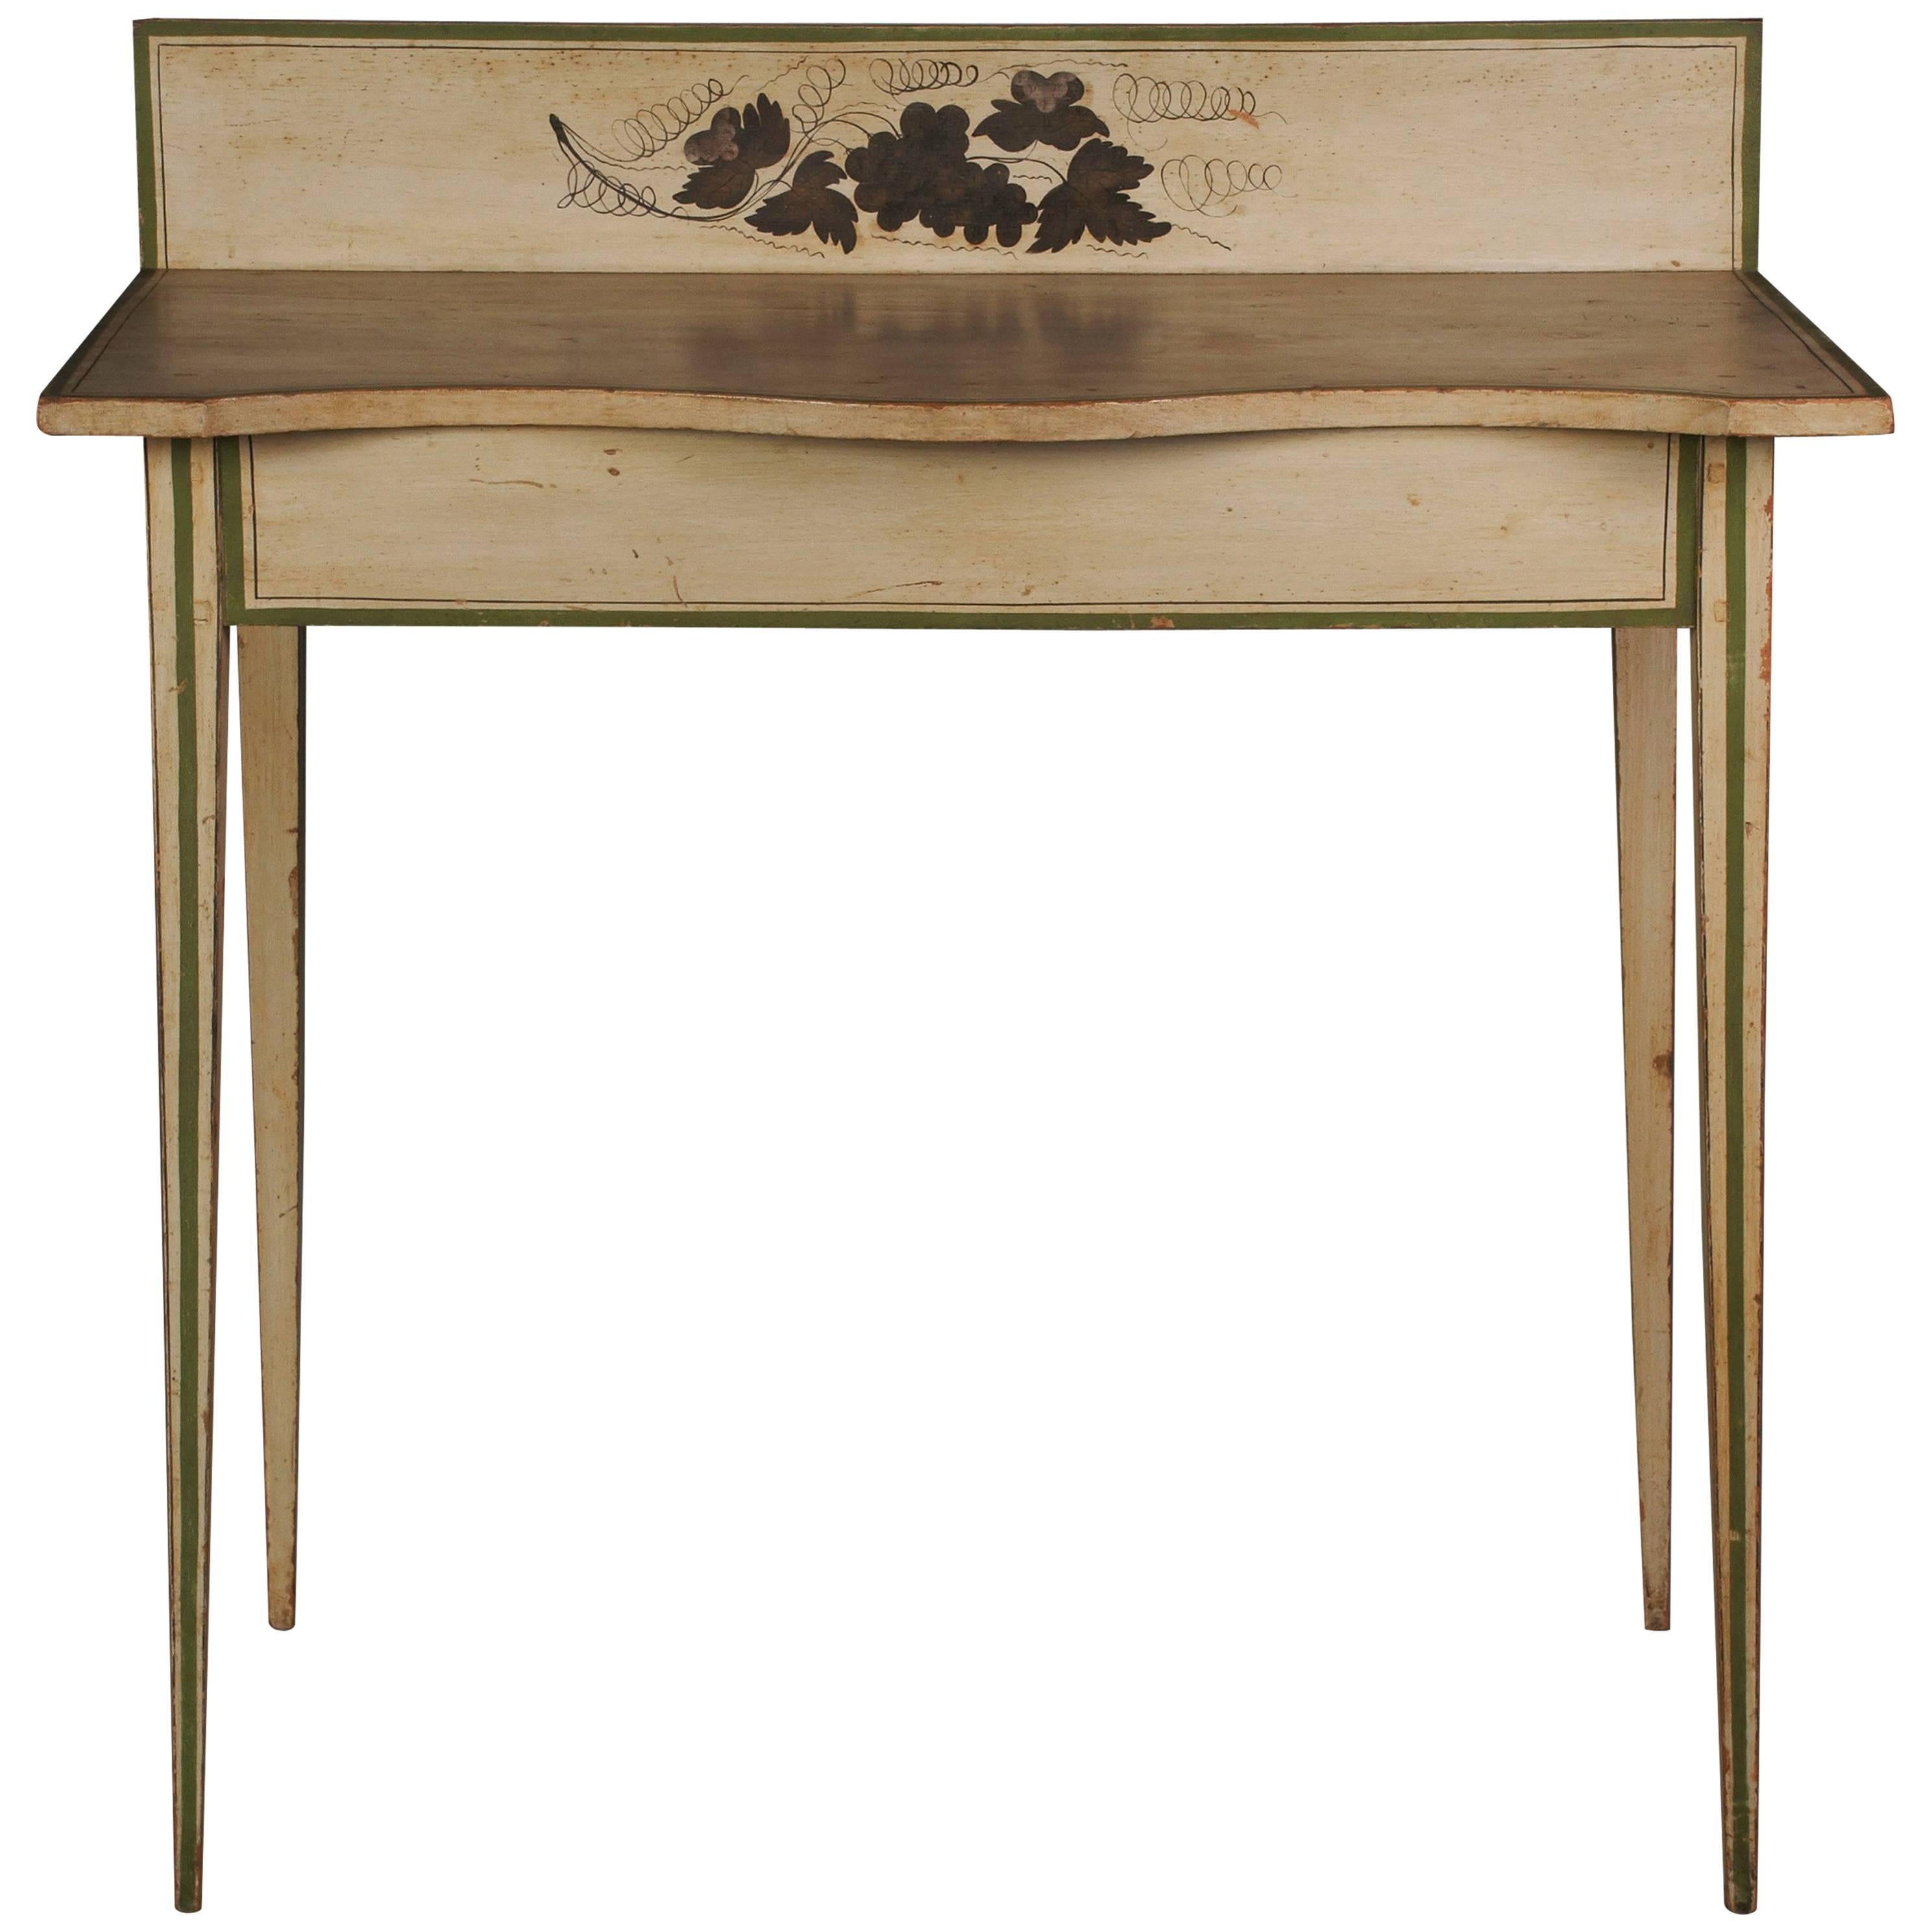 New England Gray-Painted and Stencil-Decorated Serving Table For Sale